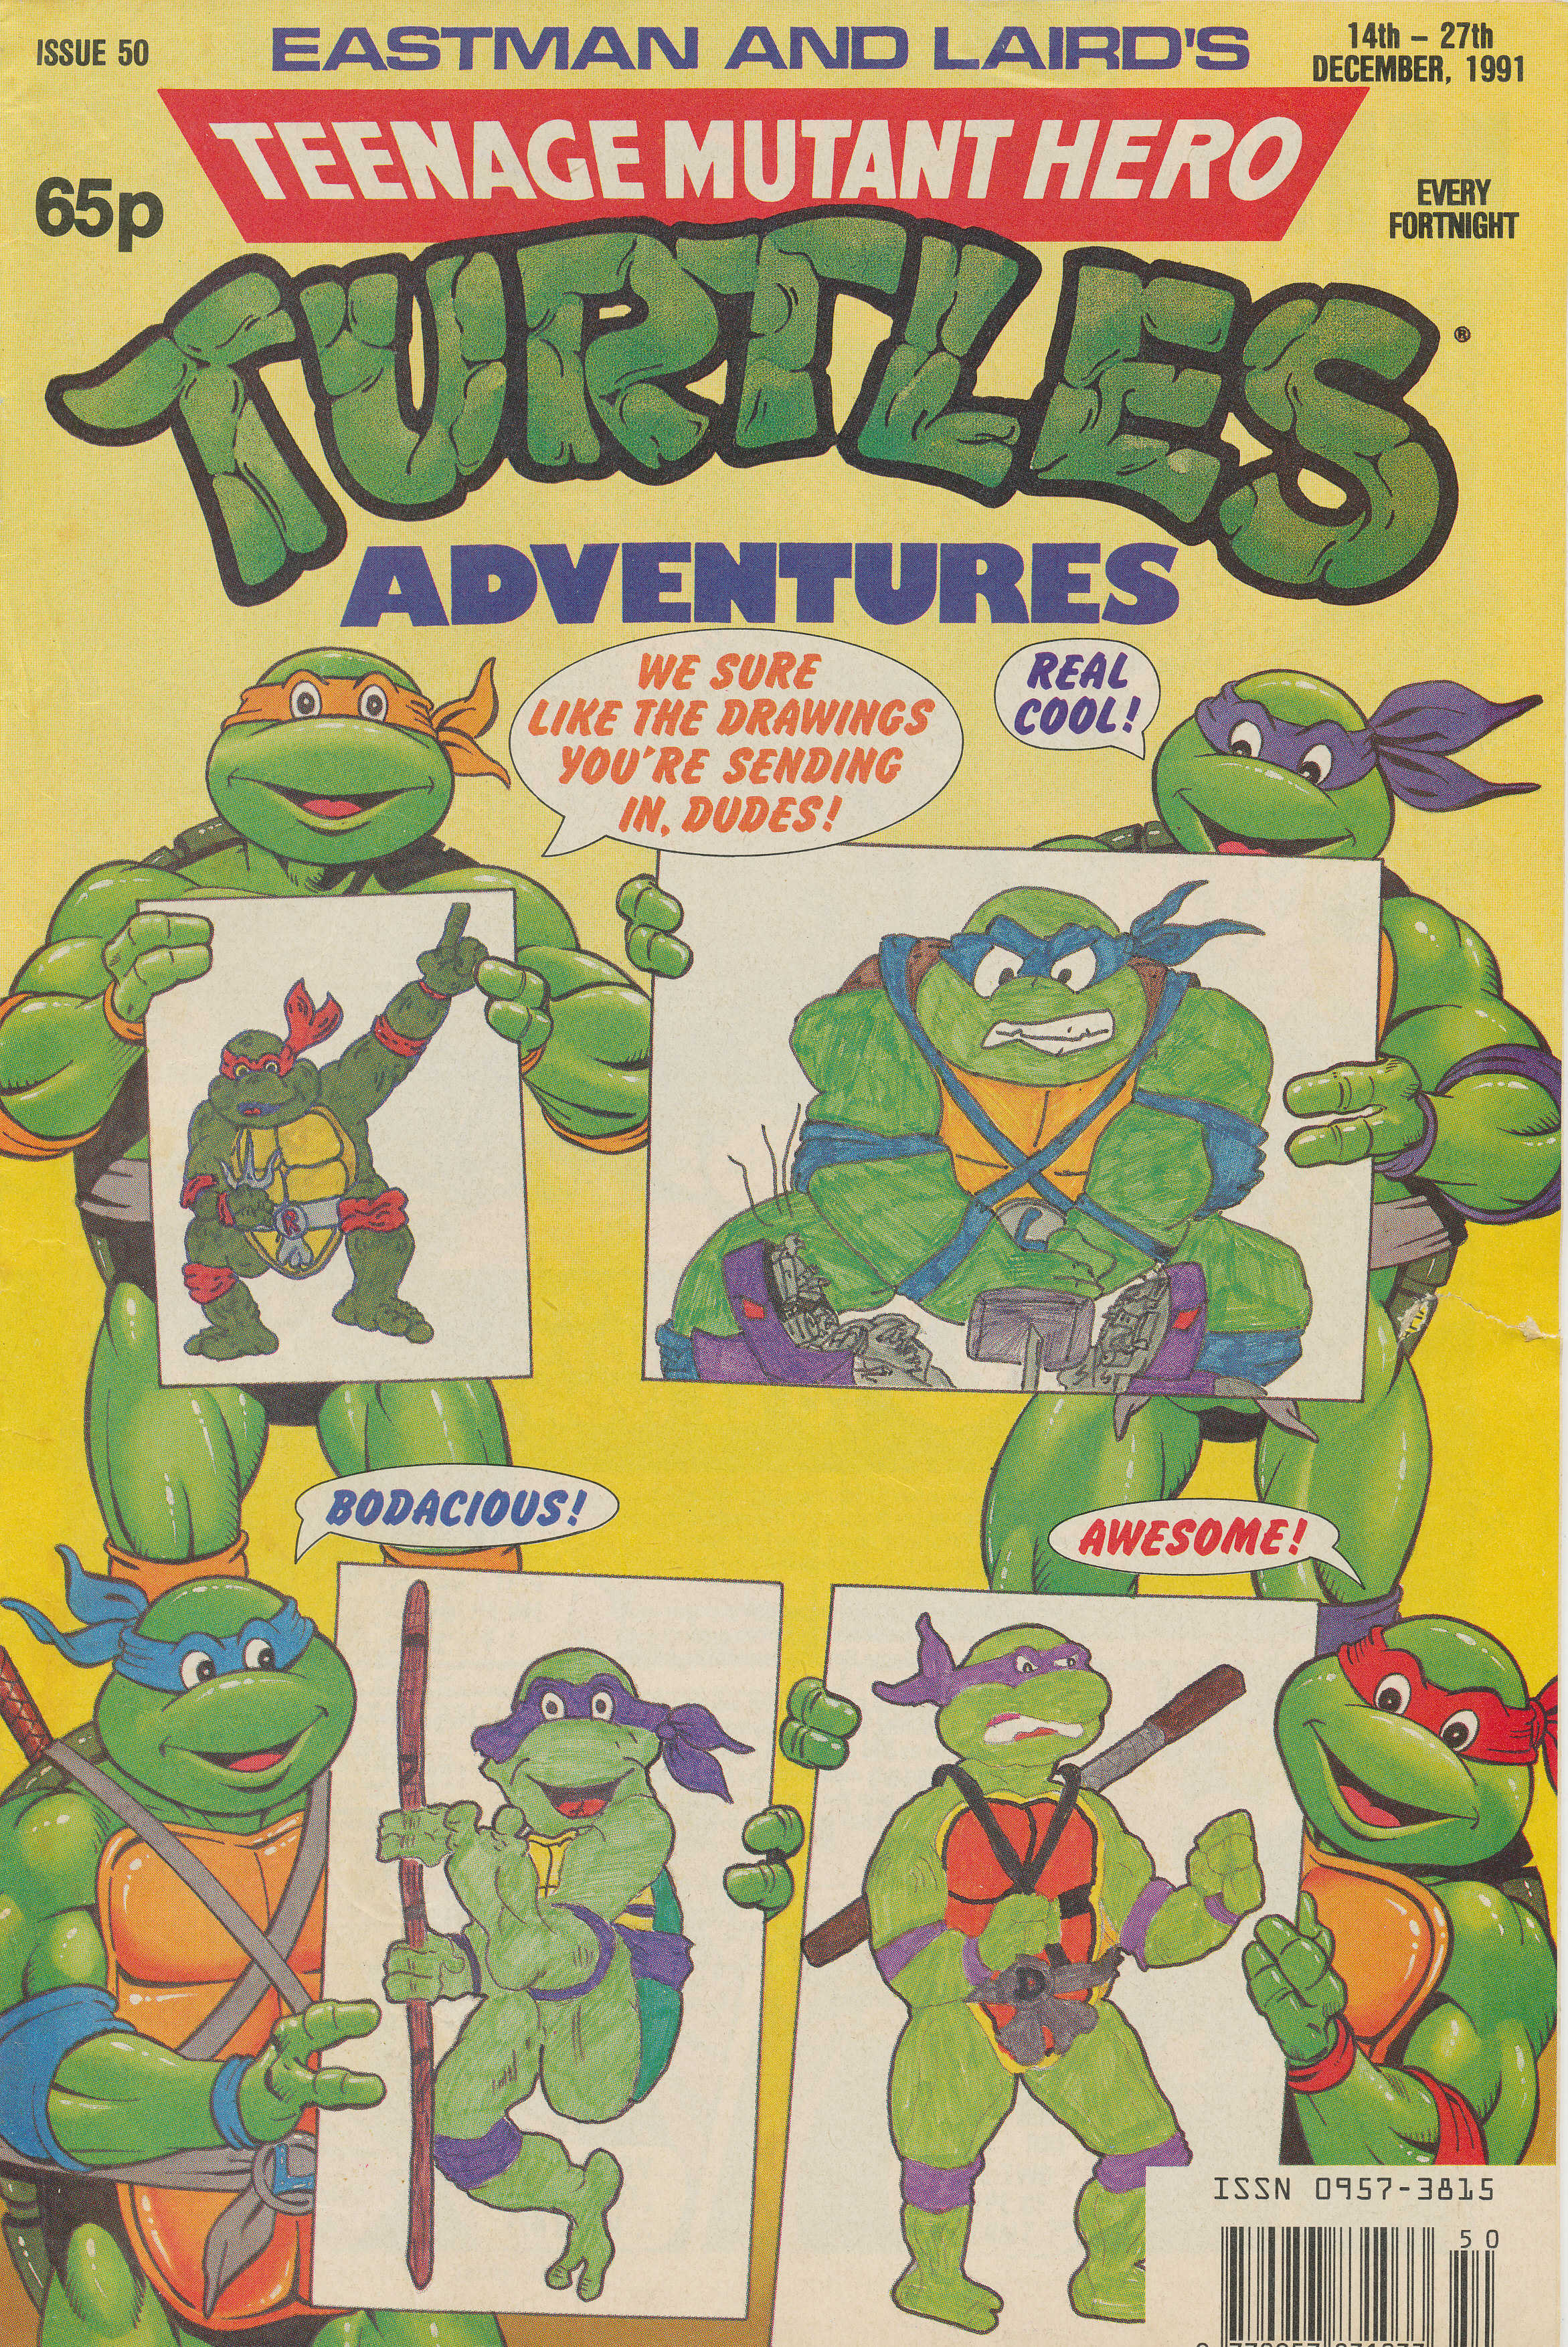 https://static.wikia.nocookie.net/tmnt/images/8/8f/Tmht50-cover.jpg/revision/latest?cb=20210610135826